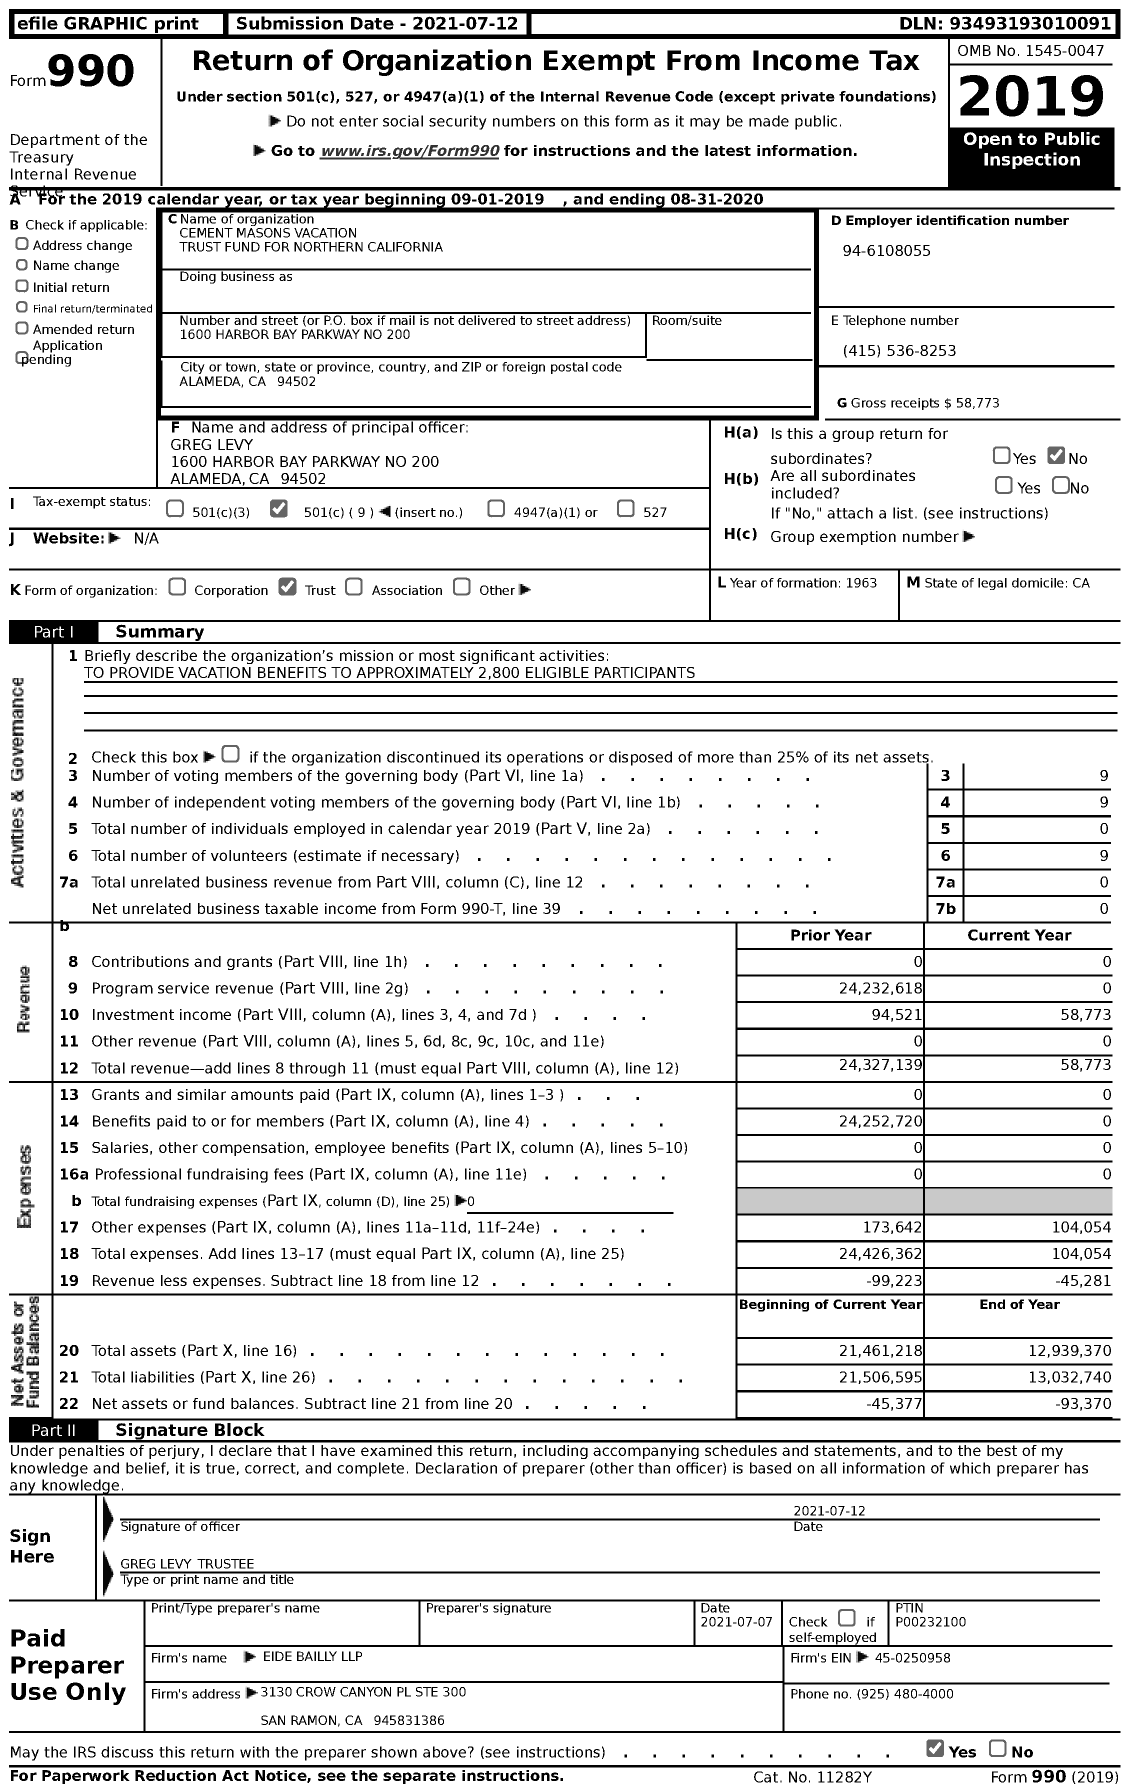 Image of first page of 2019 Form 990 for Cement Masons Vacation Trust Fund for Northern California